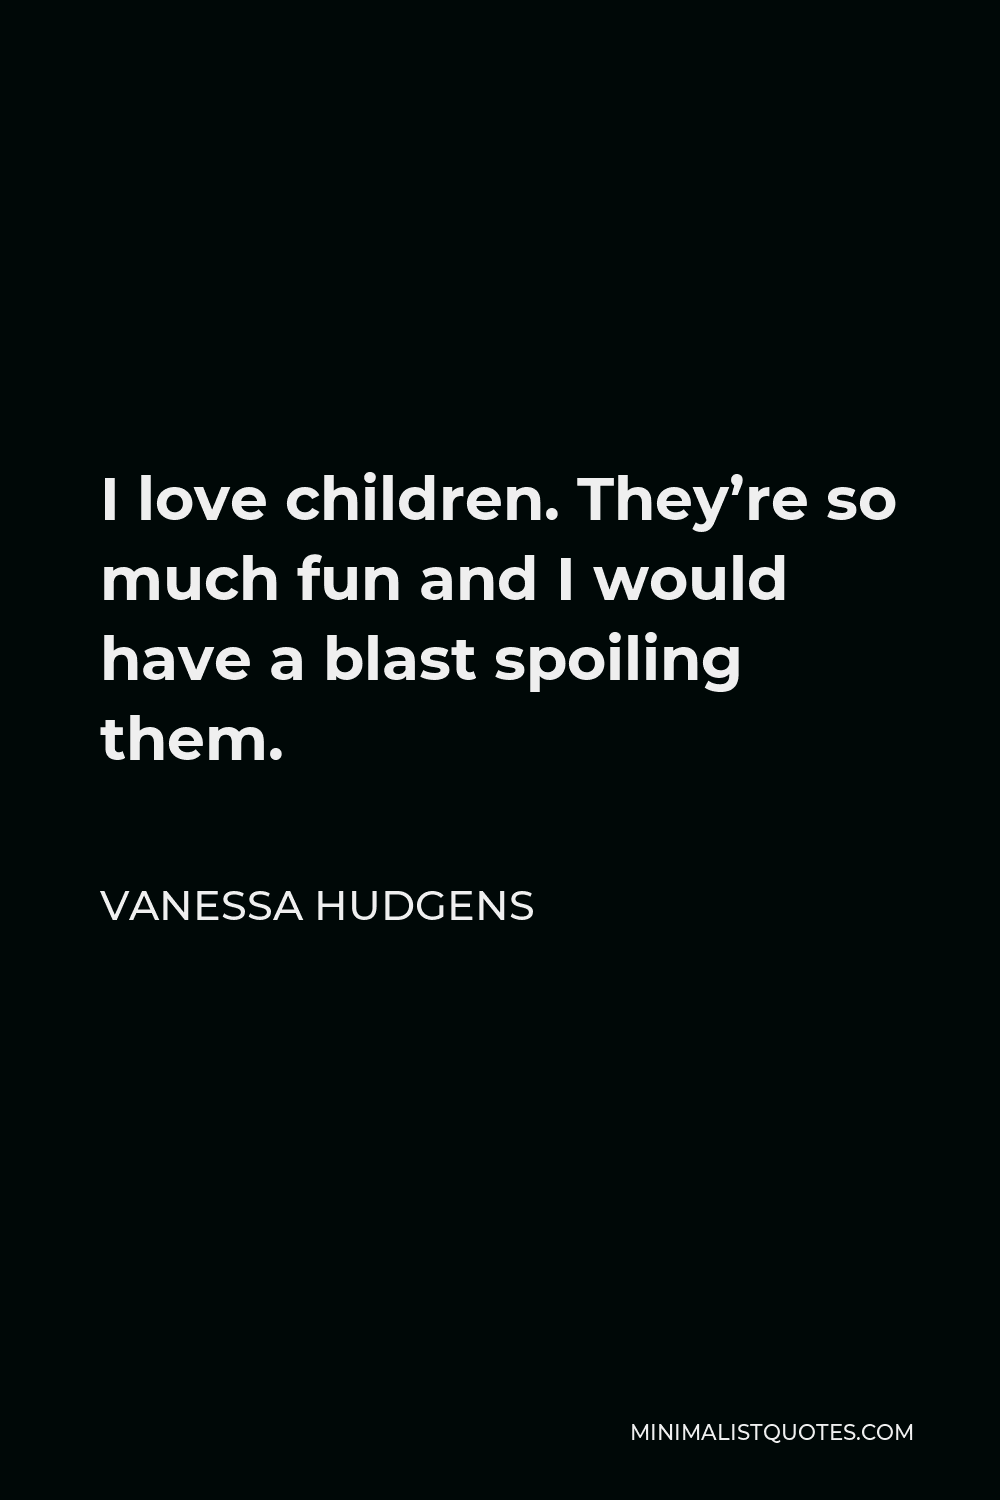 Vanessa Hudgens Quote - I love children. They’re so much fun and I would have a blast spoiling them.